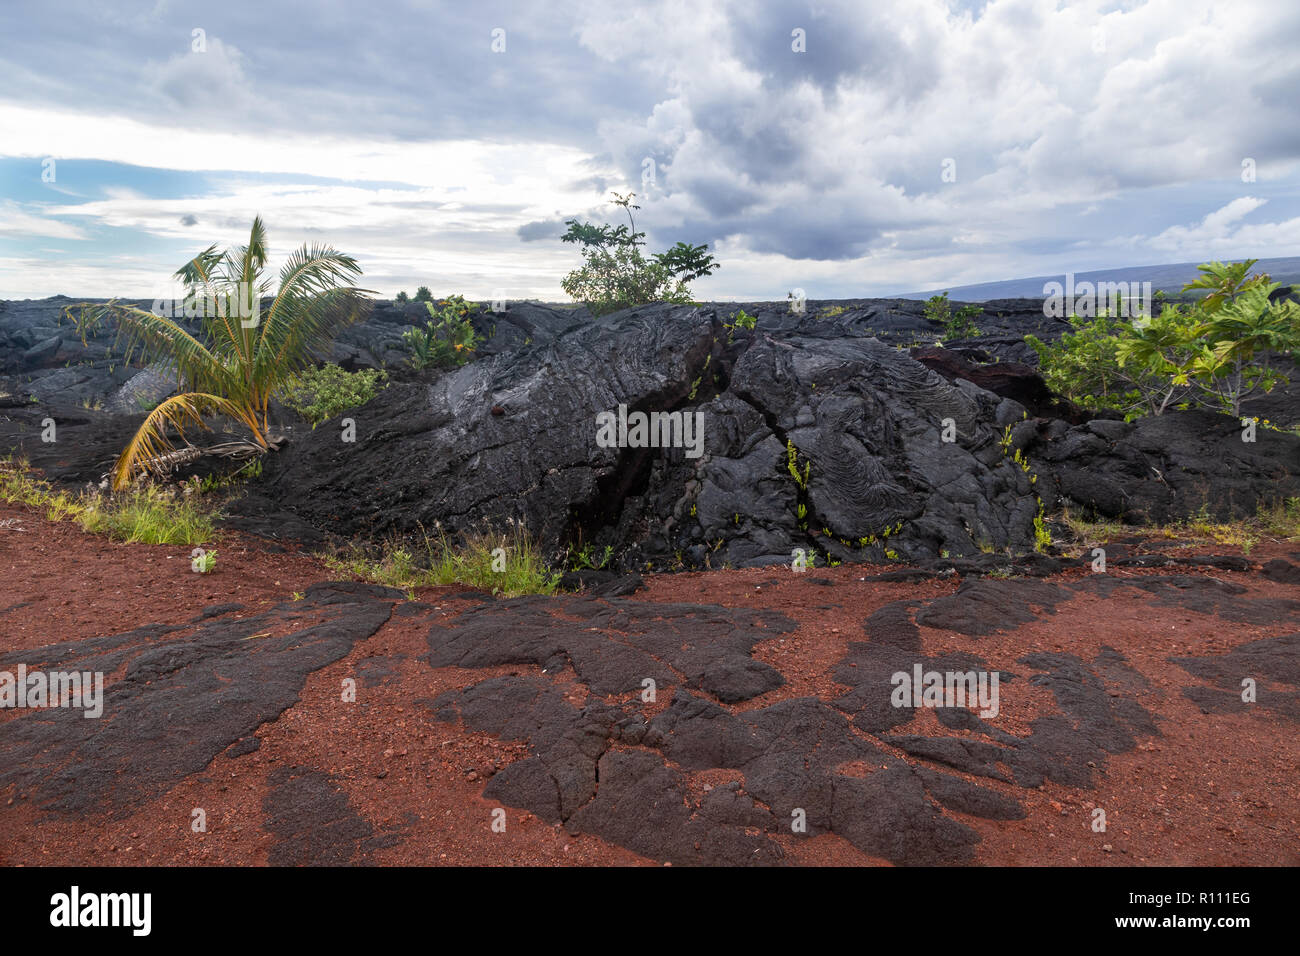 Outcrop of pahoehoe lava, in lava field on Hawaii's Big Island. Surrounded by tropical plants growing in the area, with red and black volcanic rock. Stock Photo